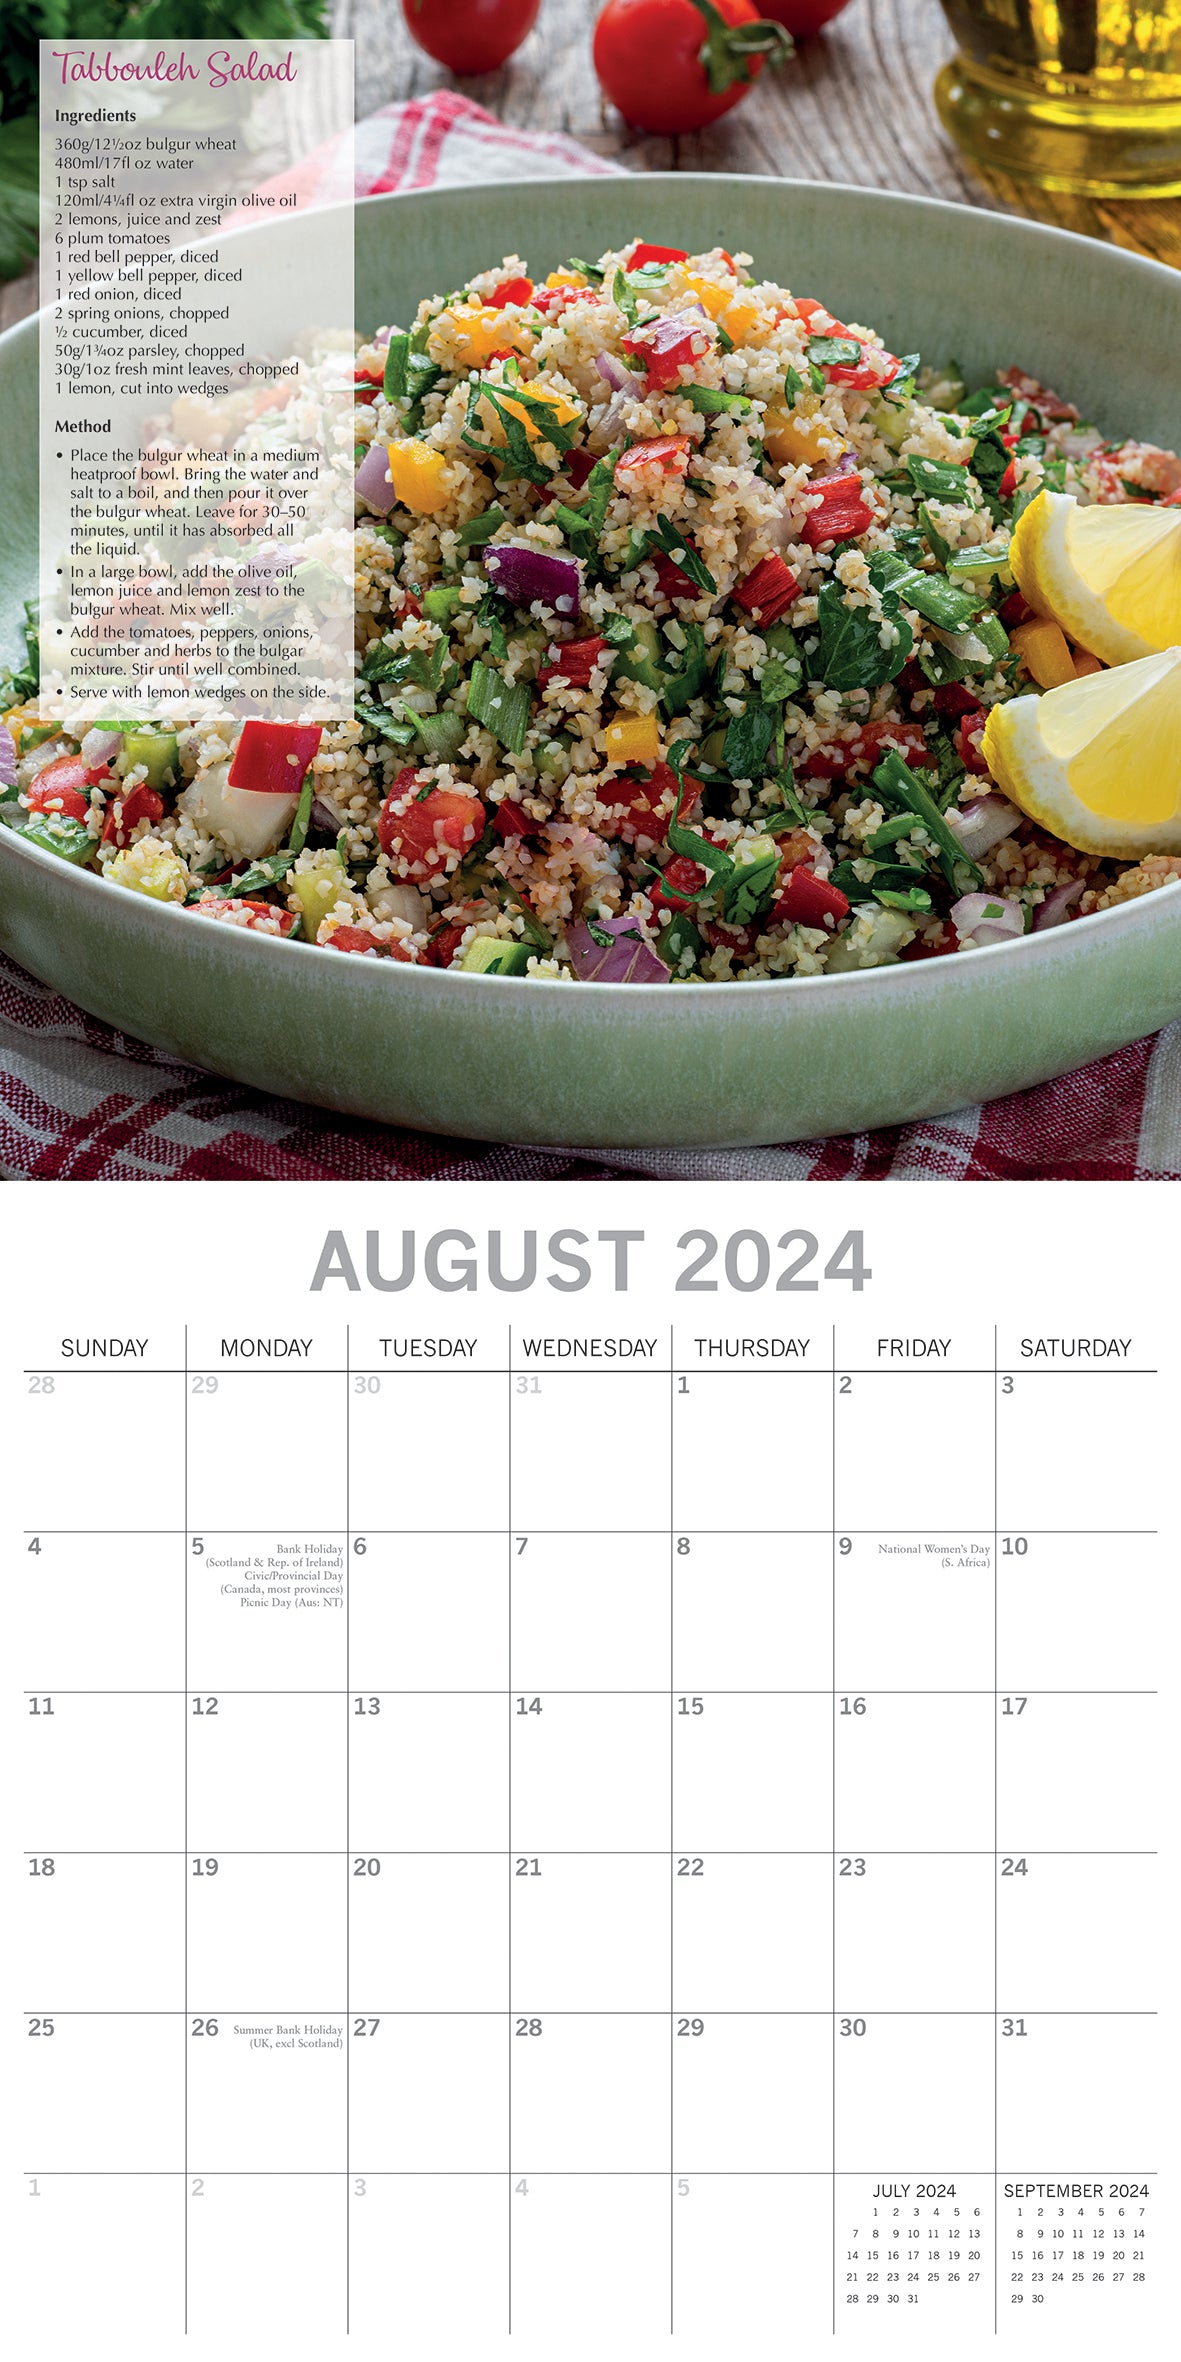 Tasty Vegetarian Recipes - 2024 Square Wall Calendar 16 Months Food Planner Gift